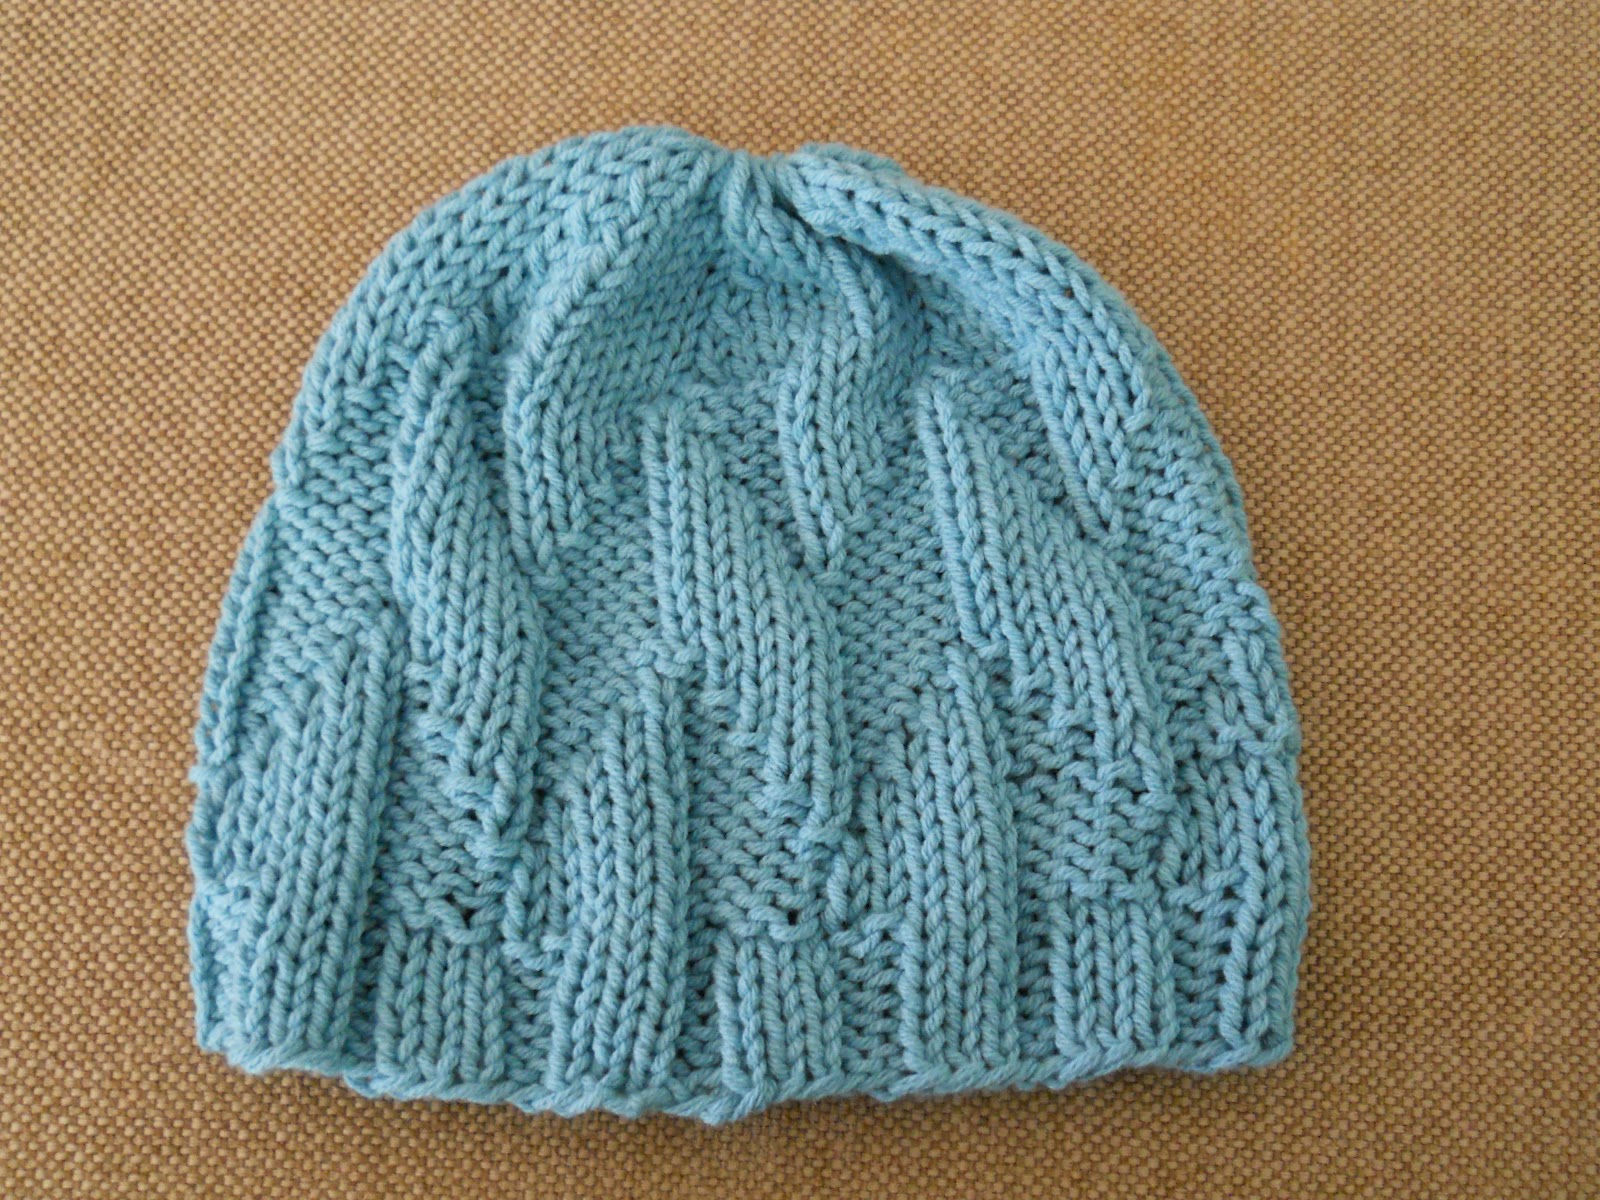 Knit Chemo Cap Pattern Knitting With Schnapps Introducing The Waves Of Hope Chemo Cap